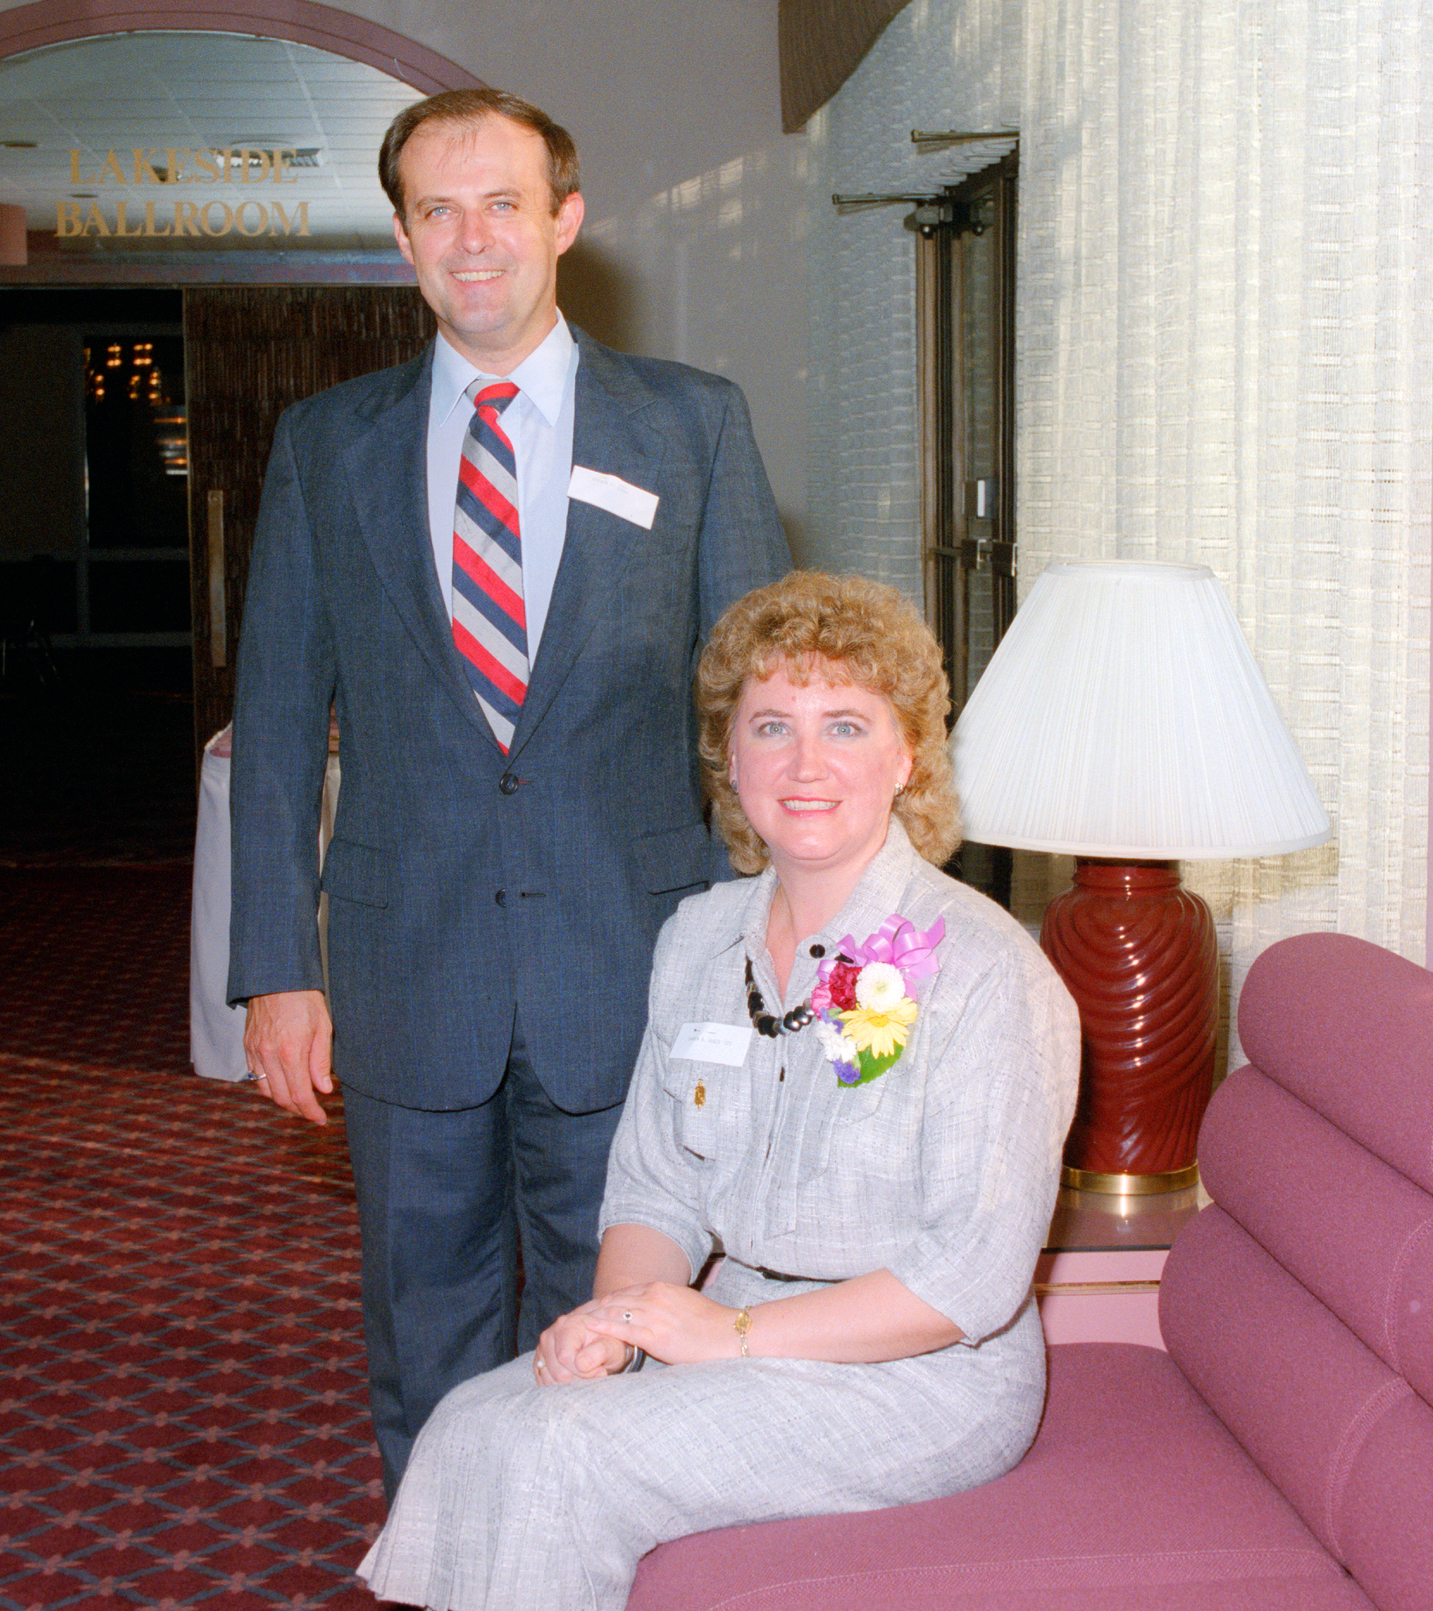 Man standing next to seated woman.